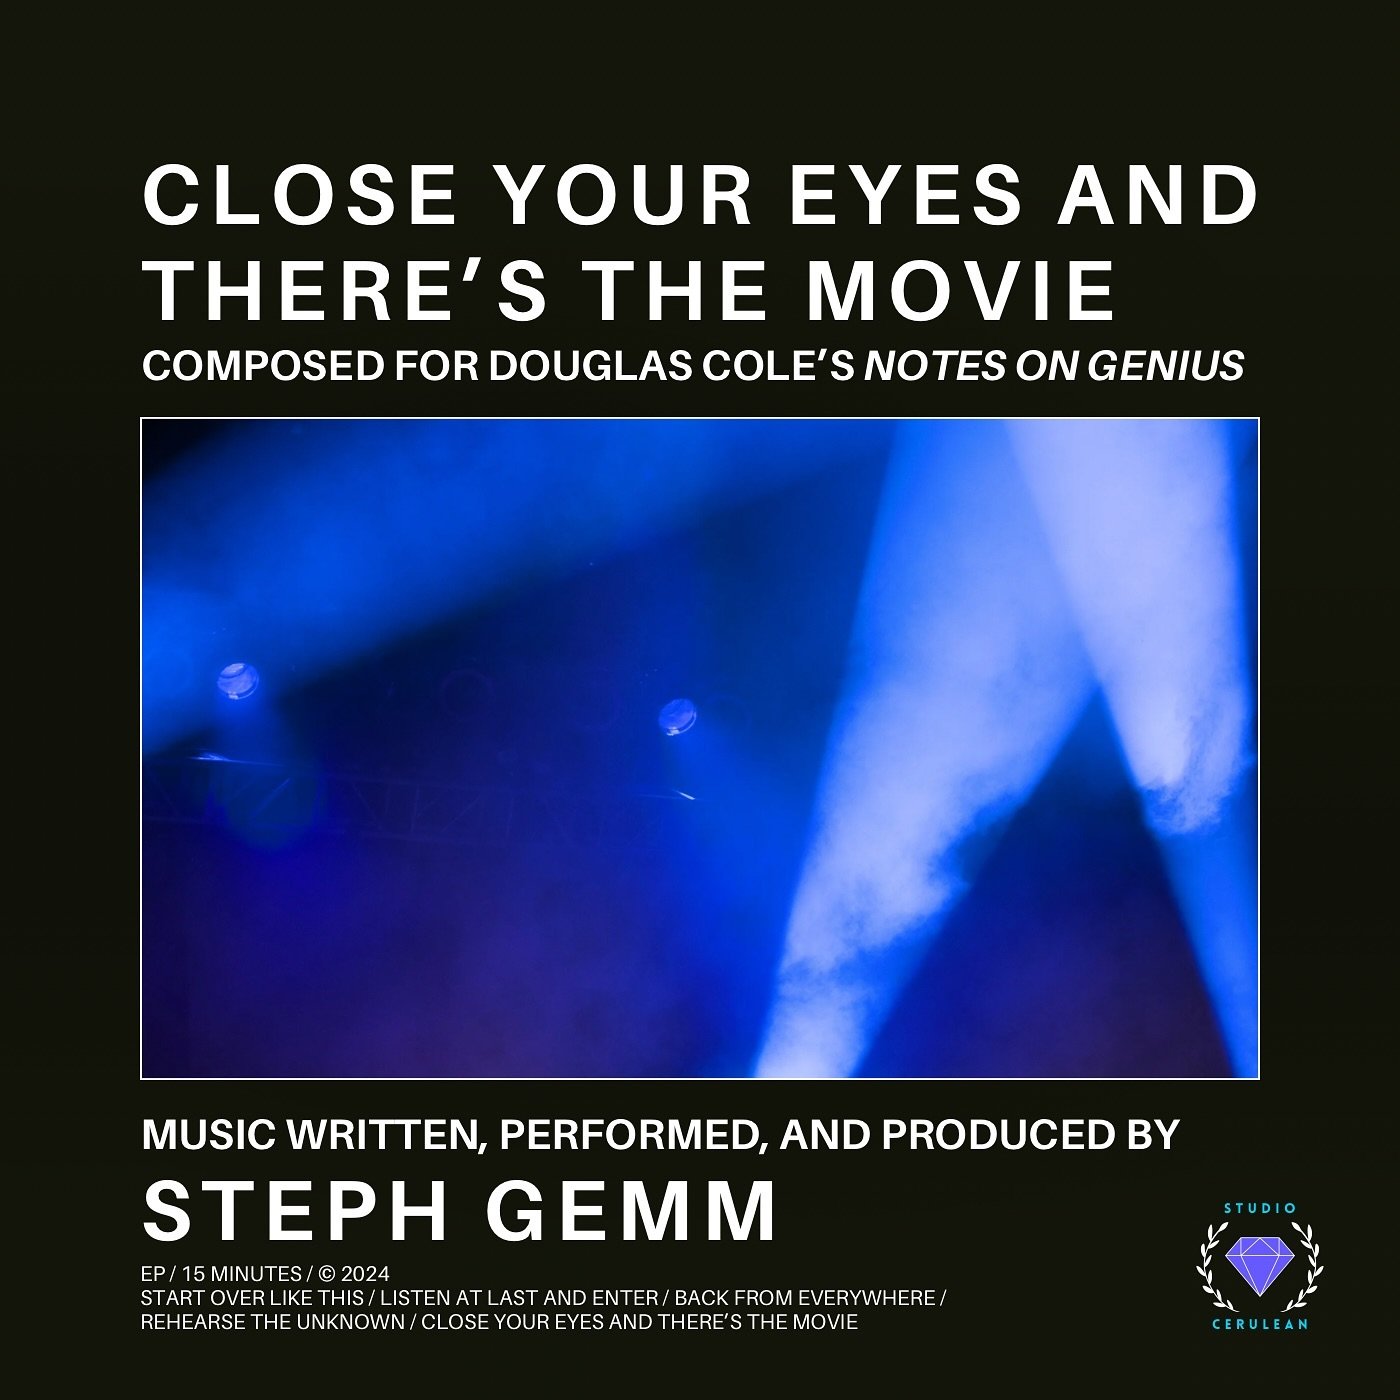 &bull; close your eyes and there&rsquo;s the movie &bull; may 26 &bull;
🎞️
I recently wrote and recorded some music for a phenomenal piece of writing by Douglas Cole, and I&rsquo;m excited to be releasing the tracks as an EP next month. This music b